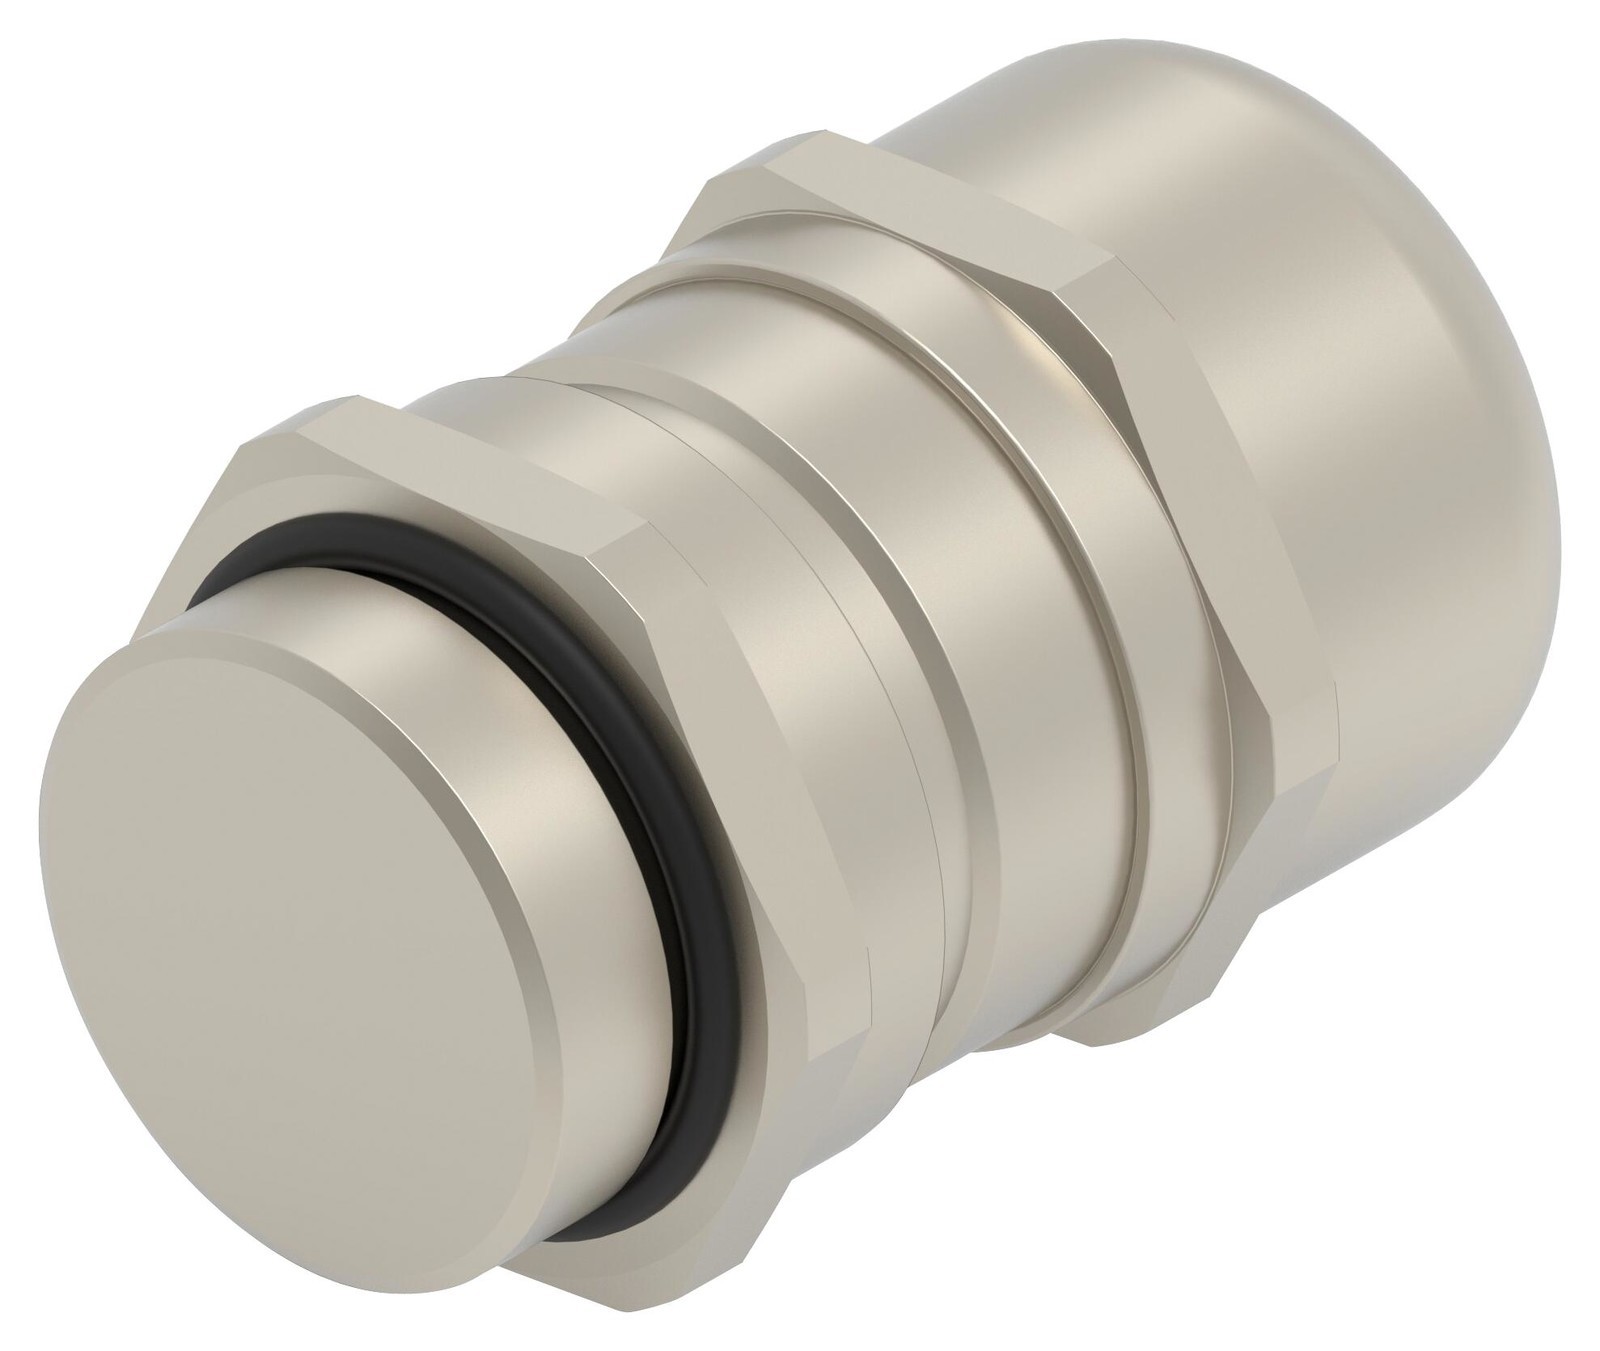 Entrelec TE Connectivity 1Sng614005R0000 Cable Gland, Brass, 14mm, M25X1.5